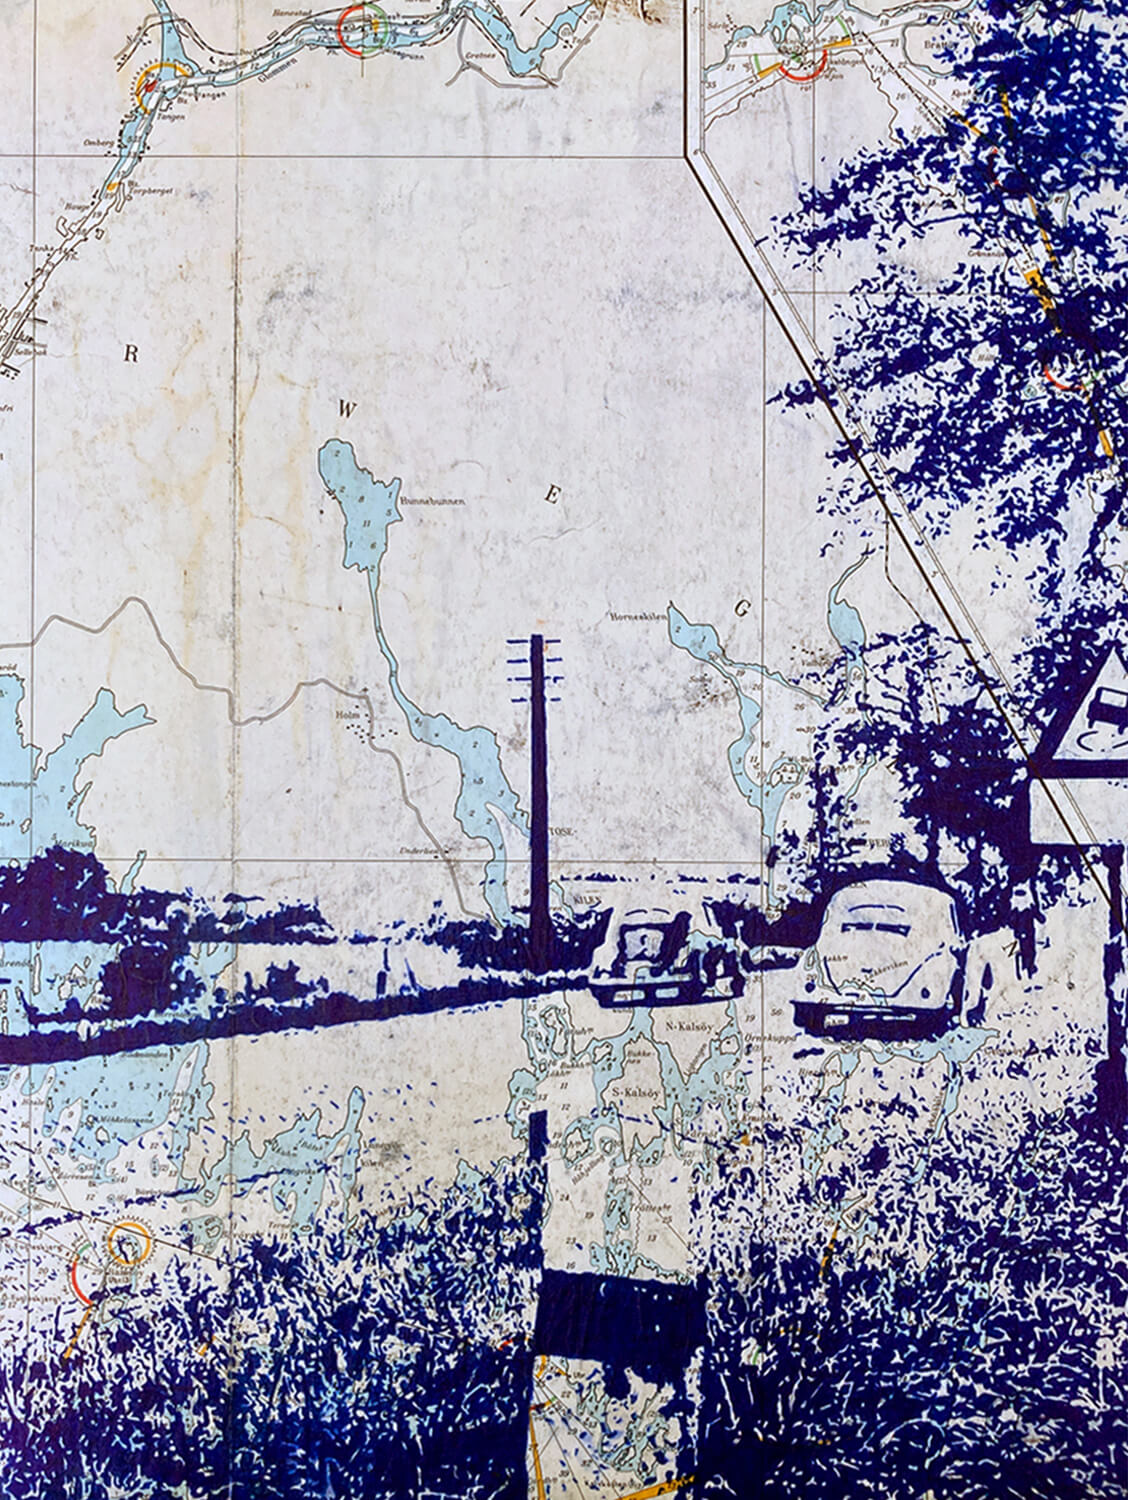 Peer Boehm, Guessing Number Plates, 2022, ballpoint pen on nautical chart on wood, 40 x 30 cm